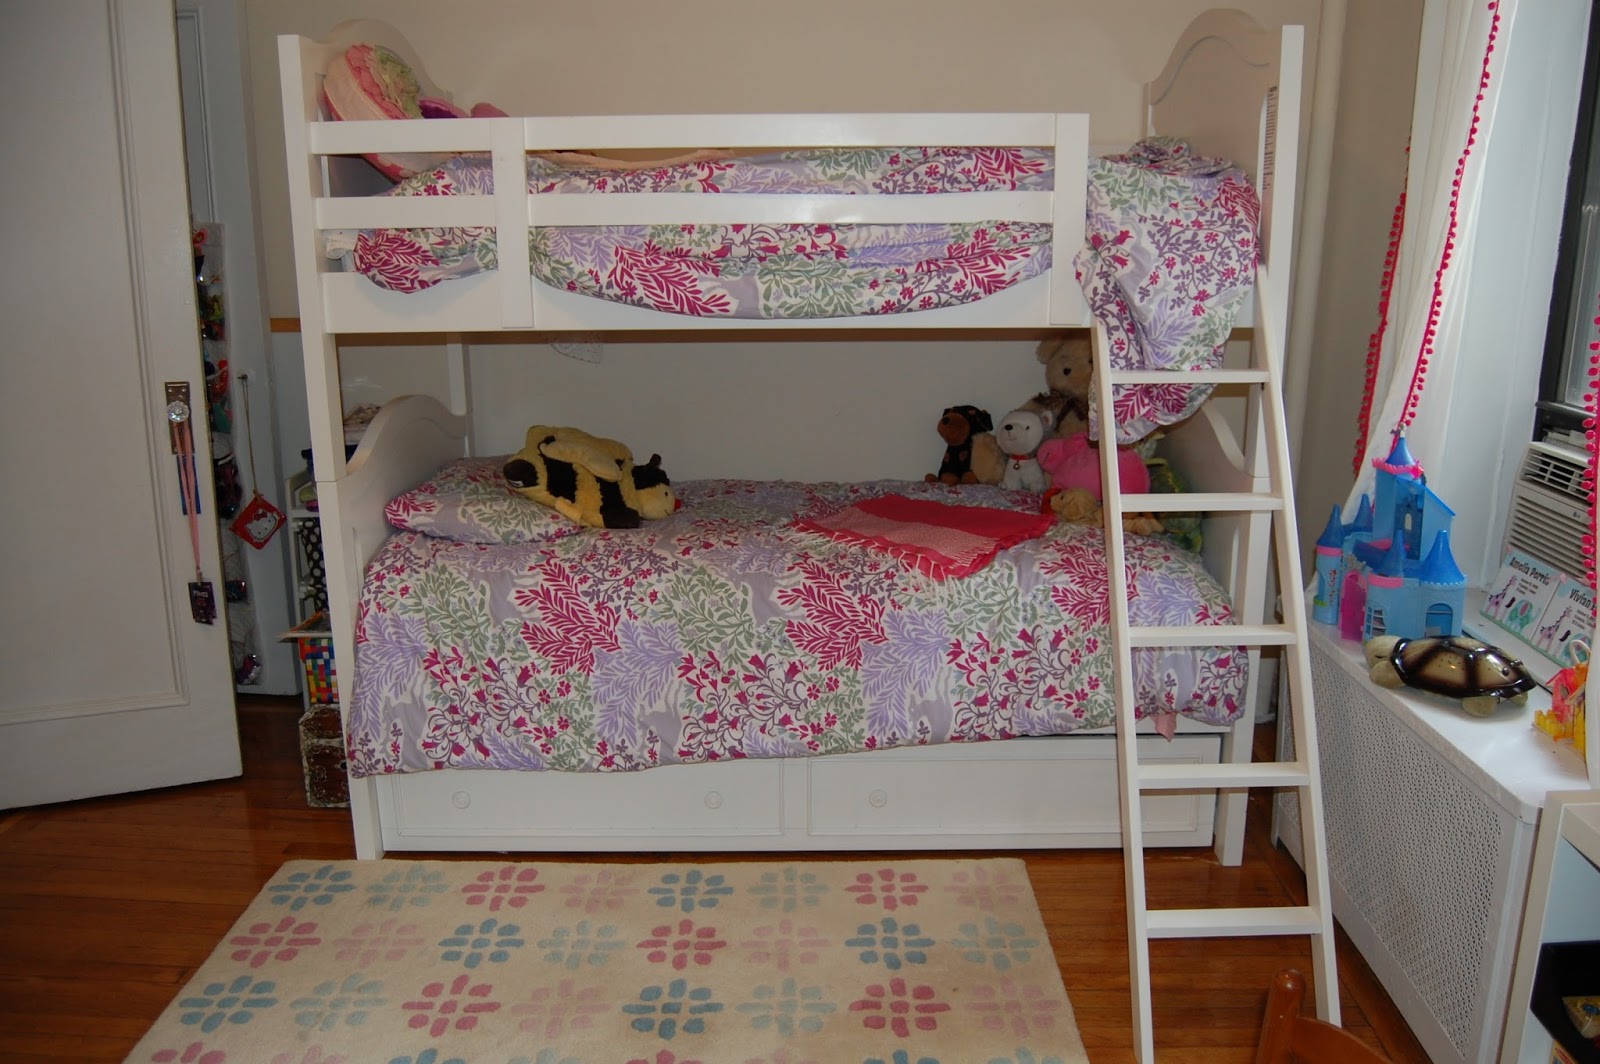 Baby Meets City A New Shared Bedroom, Raymour And Flanigan Bunk Beds